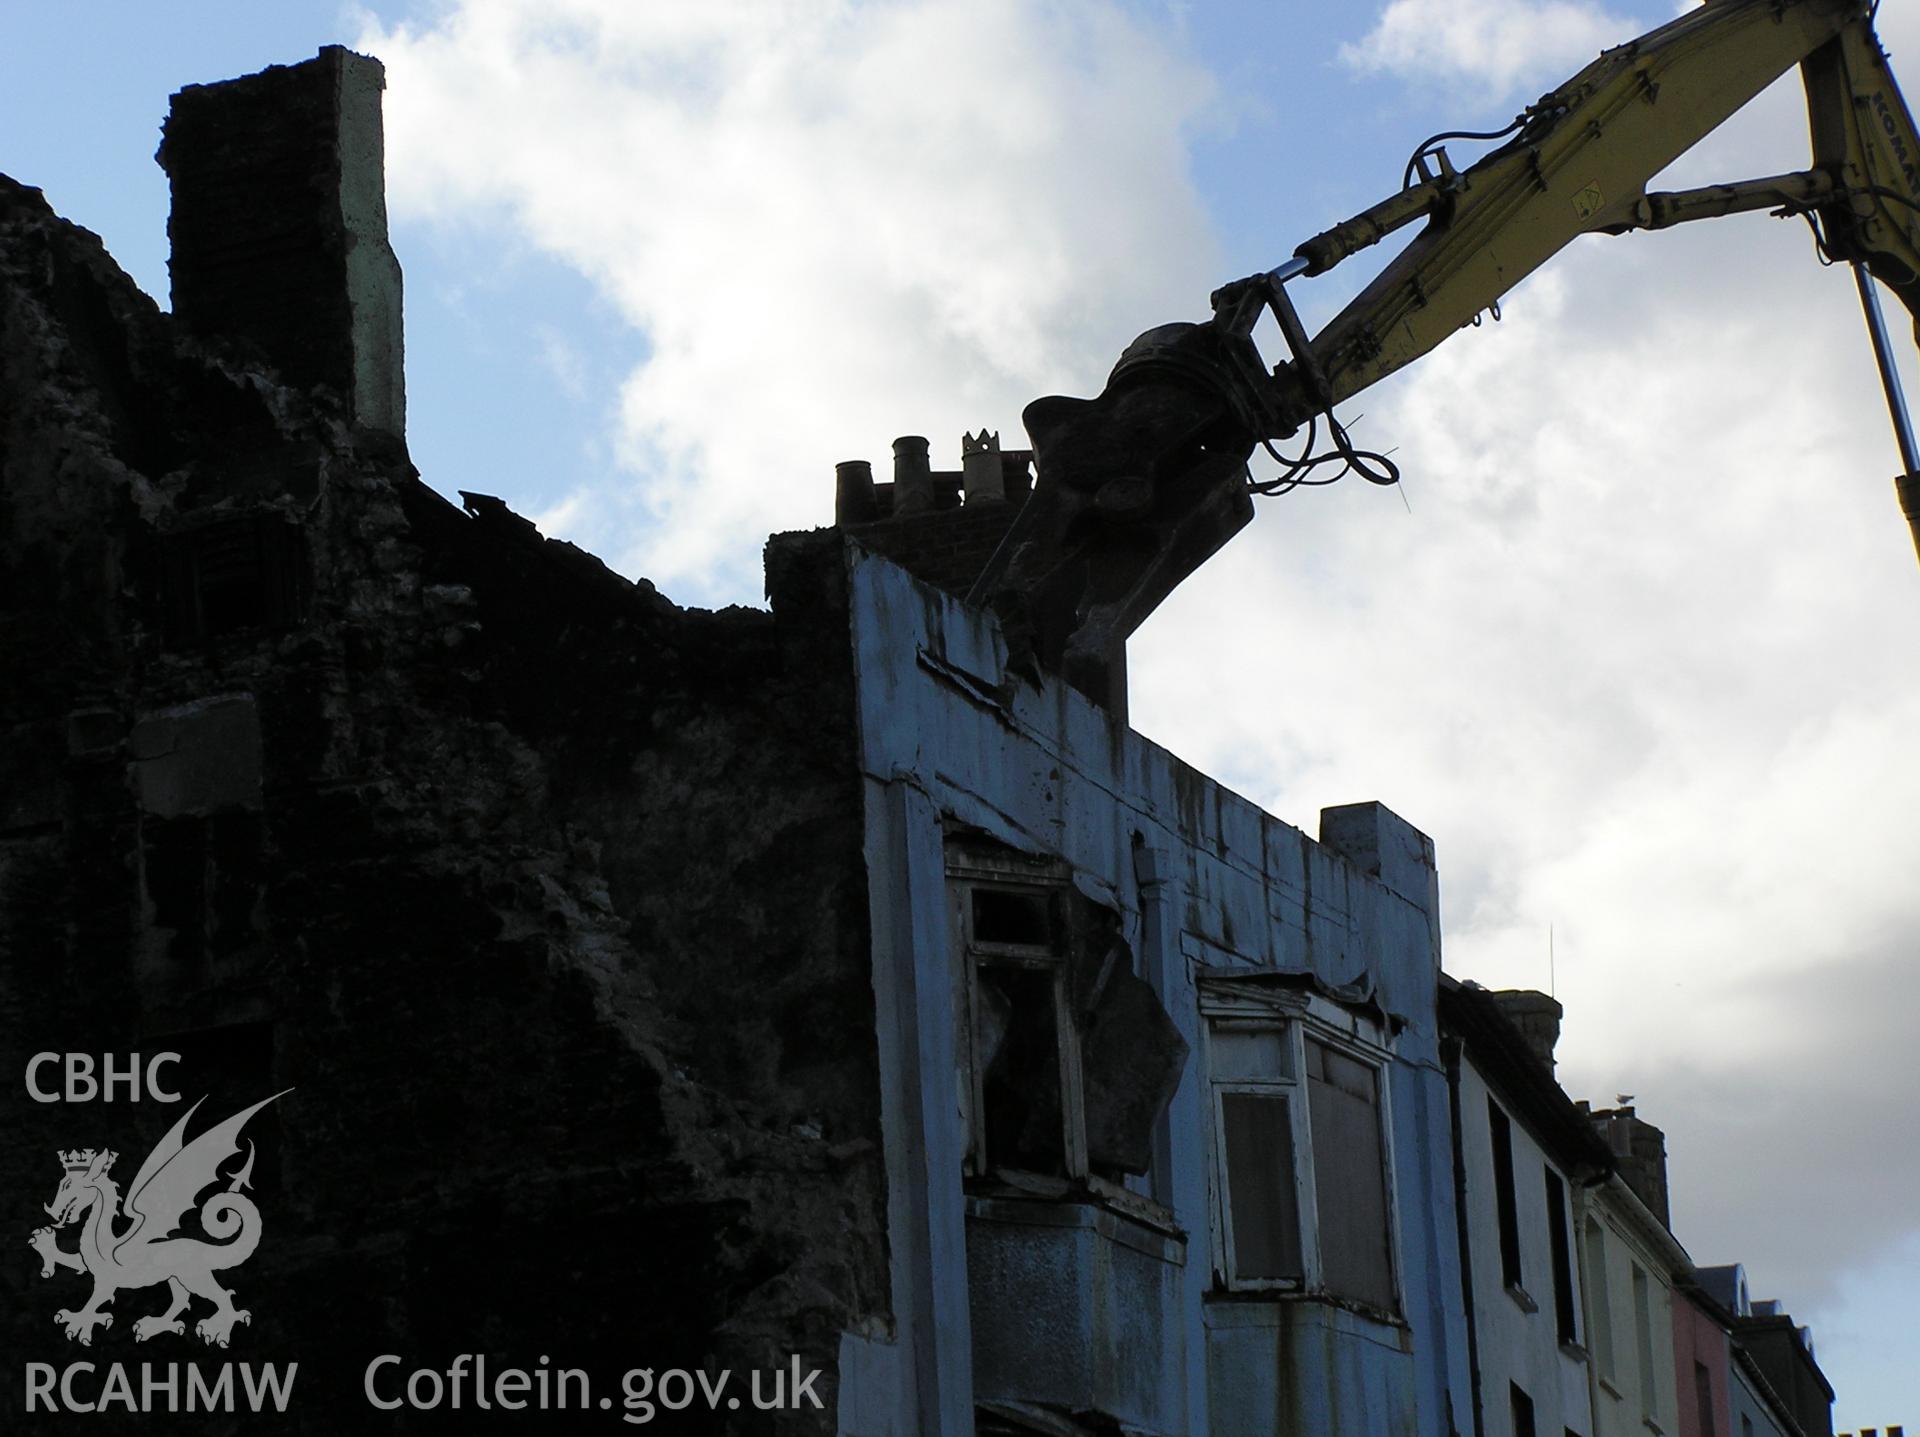 Colour digital photograph showing the Royal Gatehouse Hotel being demolished.